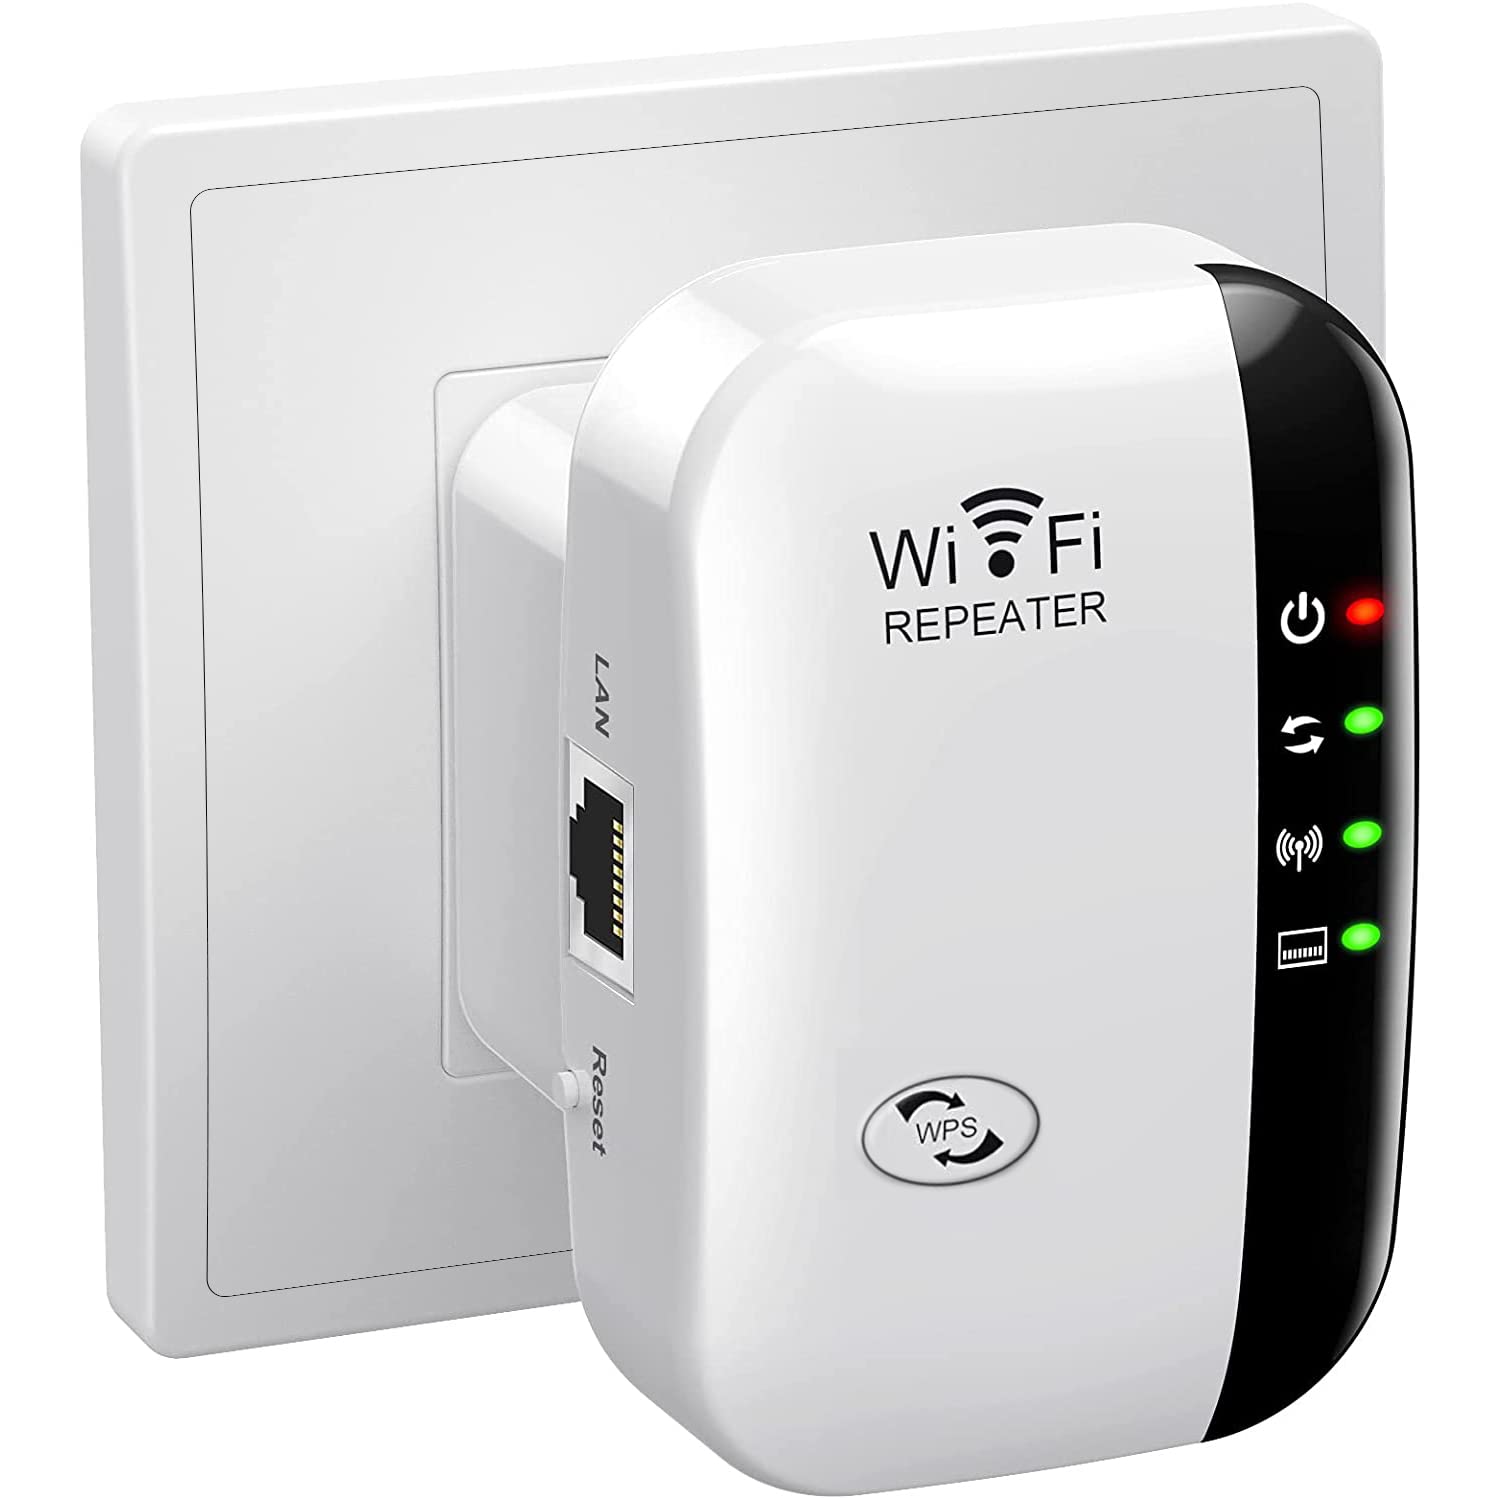 Using a WiFi extender to improve signal strength
Checking for interference from other electronic devices